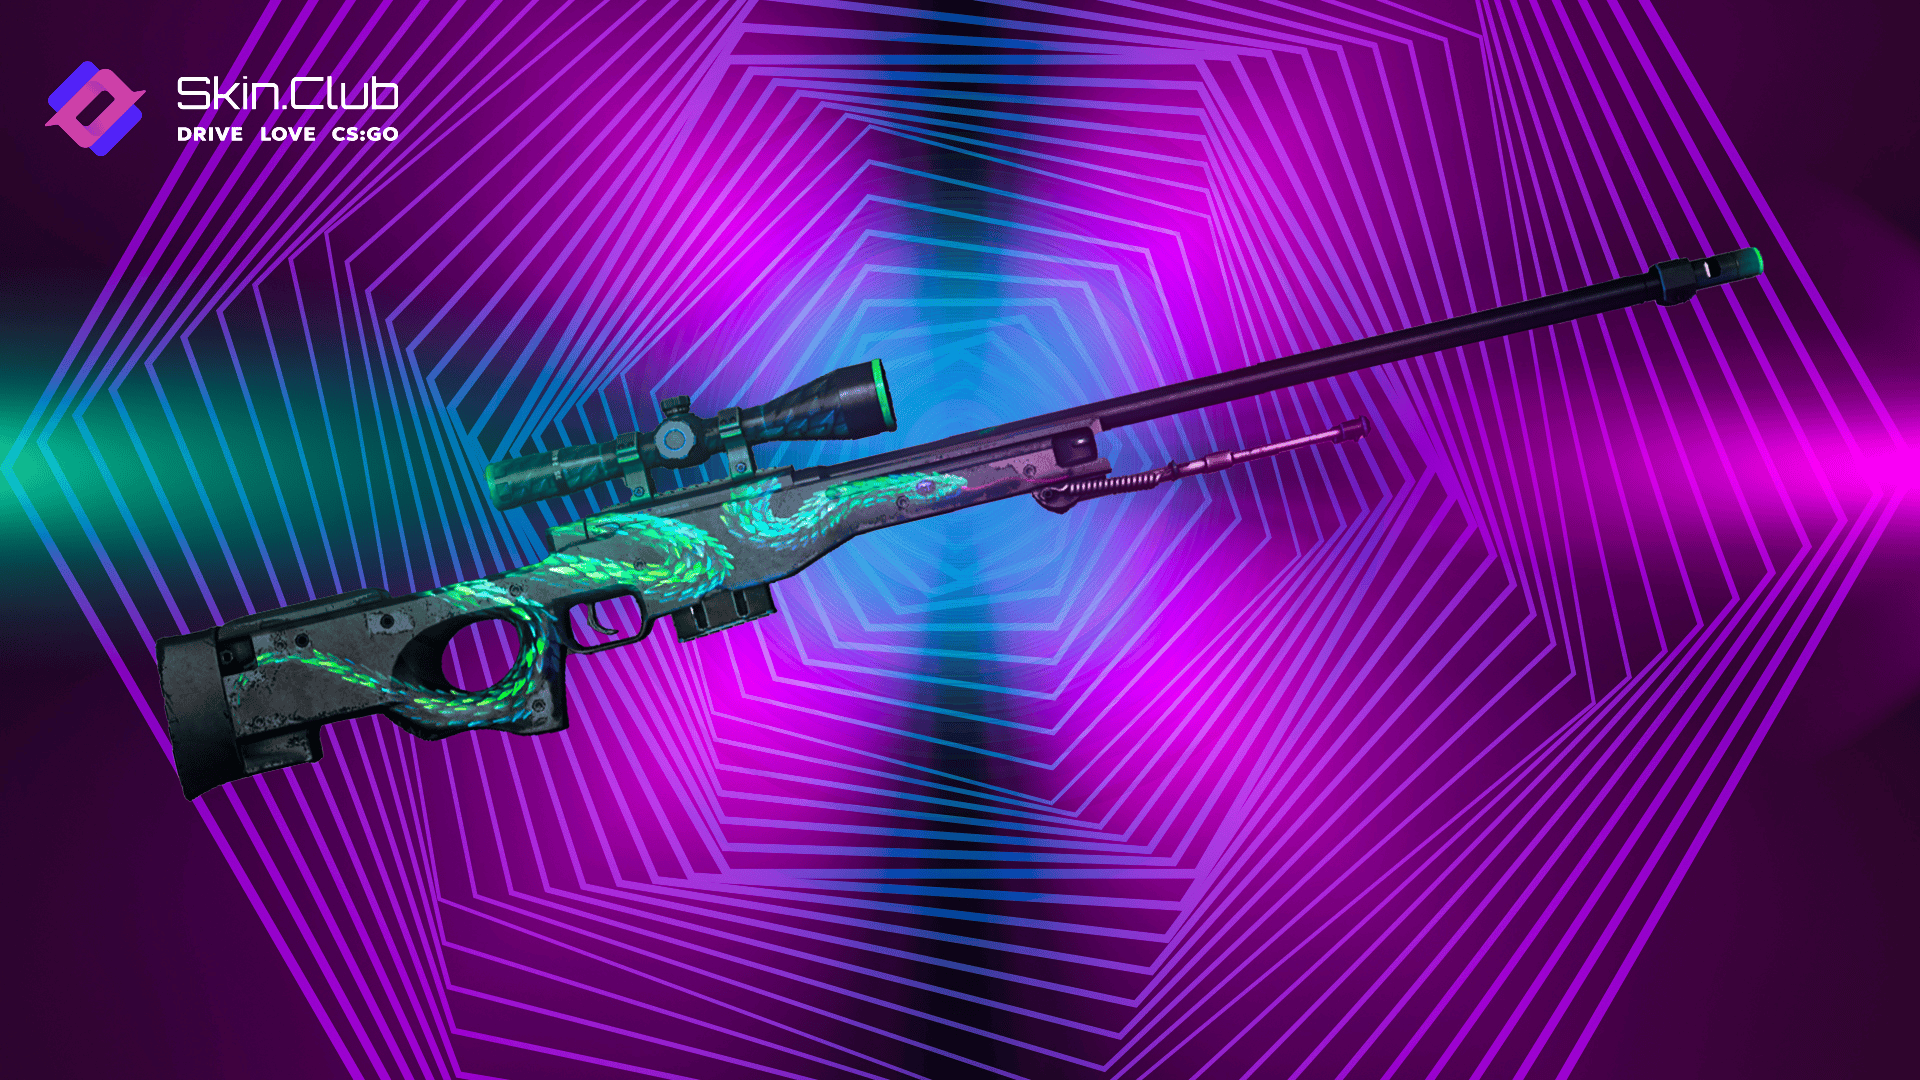 Soulstealer🇧🇬 on X: ⭕️CS:GO Flash #Giveaway ⭕️ AWP  Atheris BS with the  best pattern‼️ ☑️ Follow me and @furrythegoat 🔃 Retweet 🔔 Turn on  notifications for both accounts and show proof!